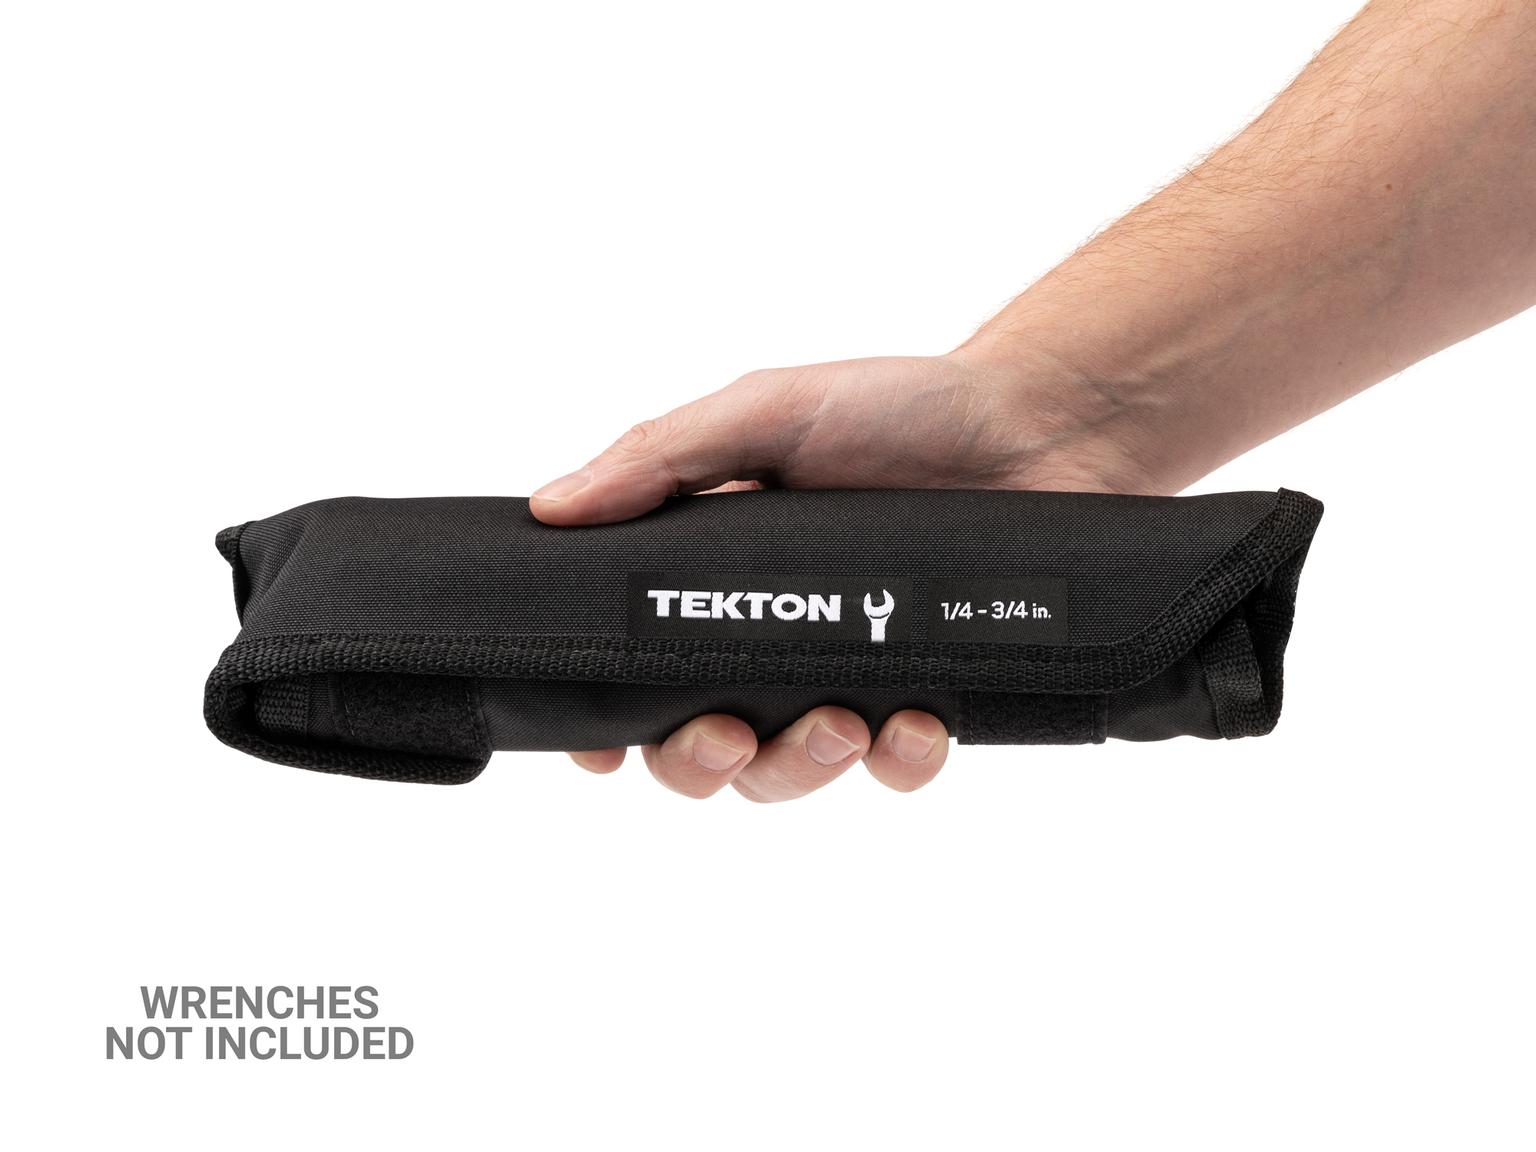 TEKTON OTP21102-T 11-Tool Combination Wrench Pouch (1/4-3/4 in.)